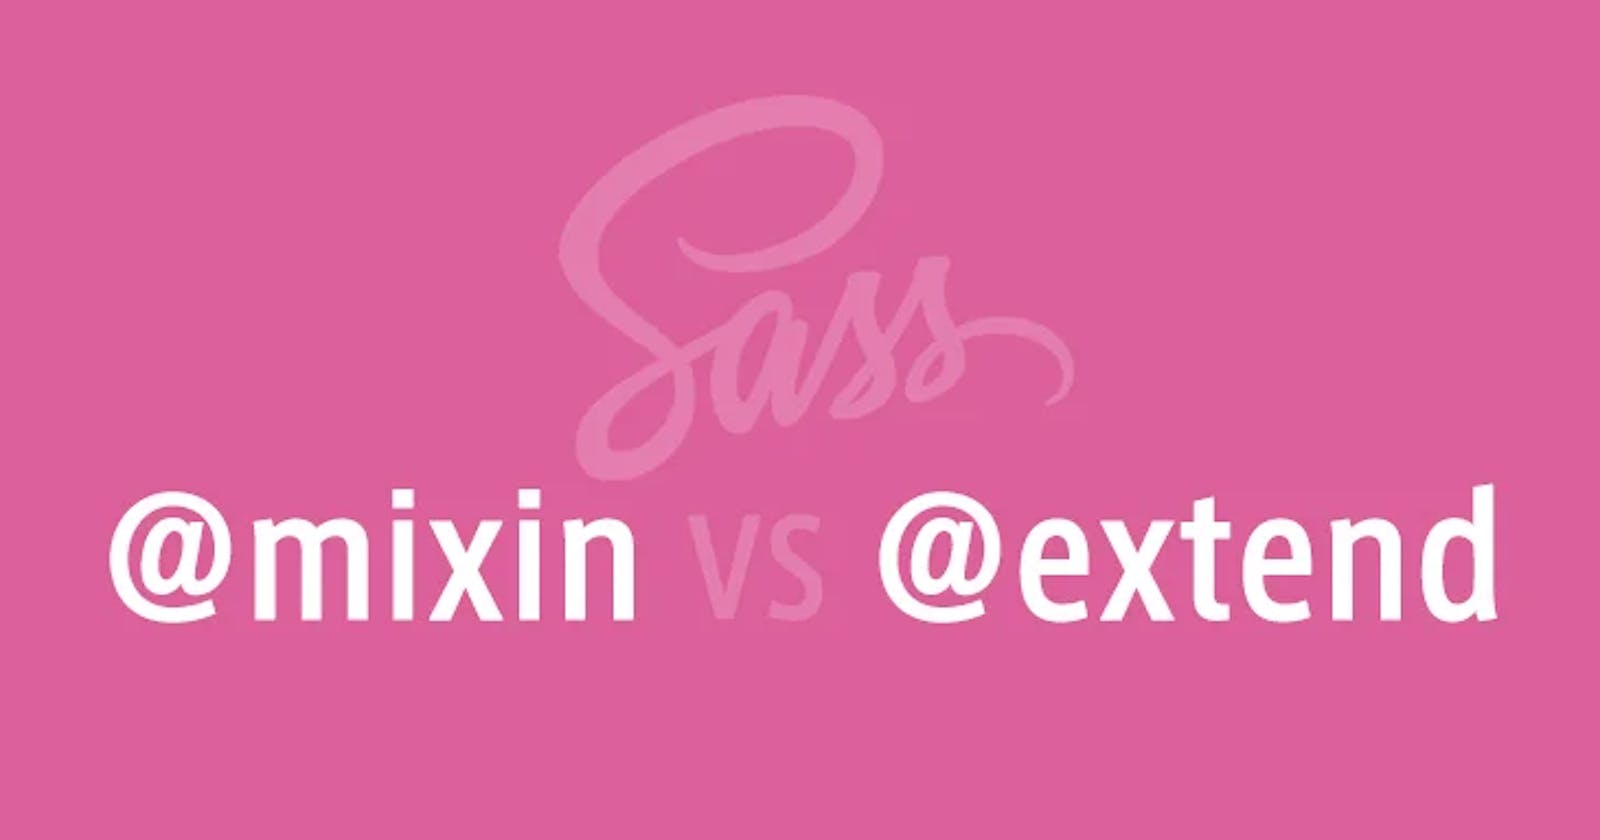 Difference between @mixin and @extends - a mini read